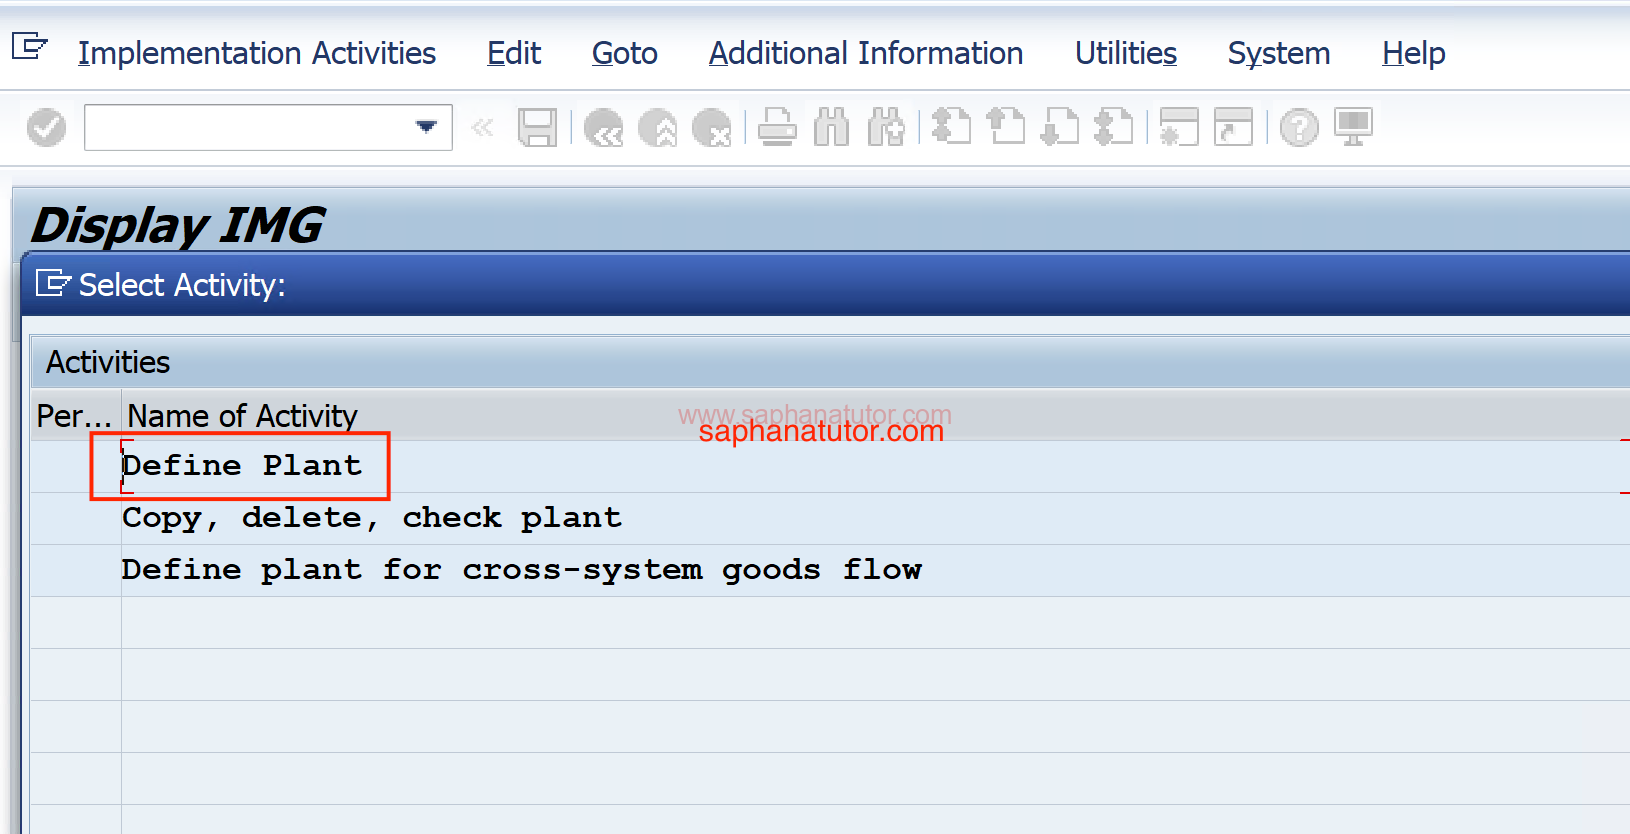 Creating a plant in SAP enterprise structure